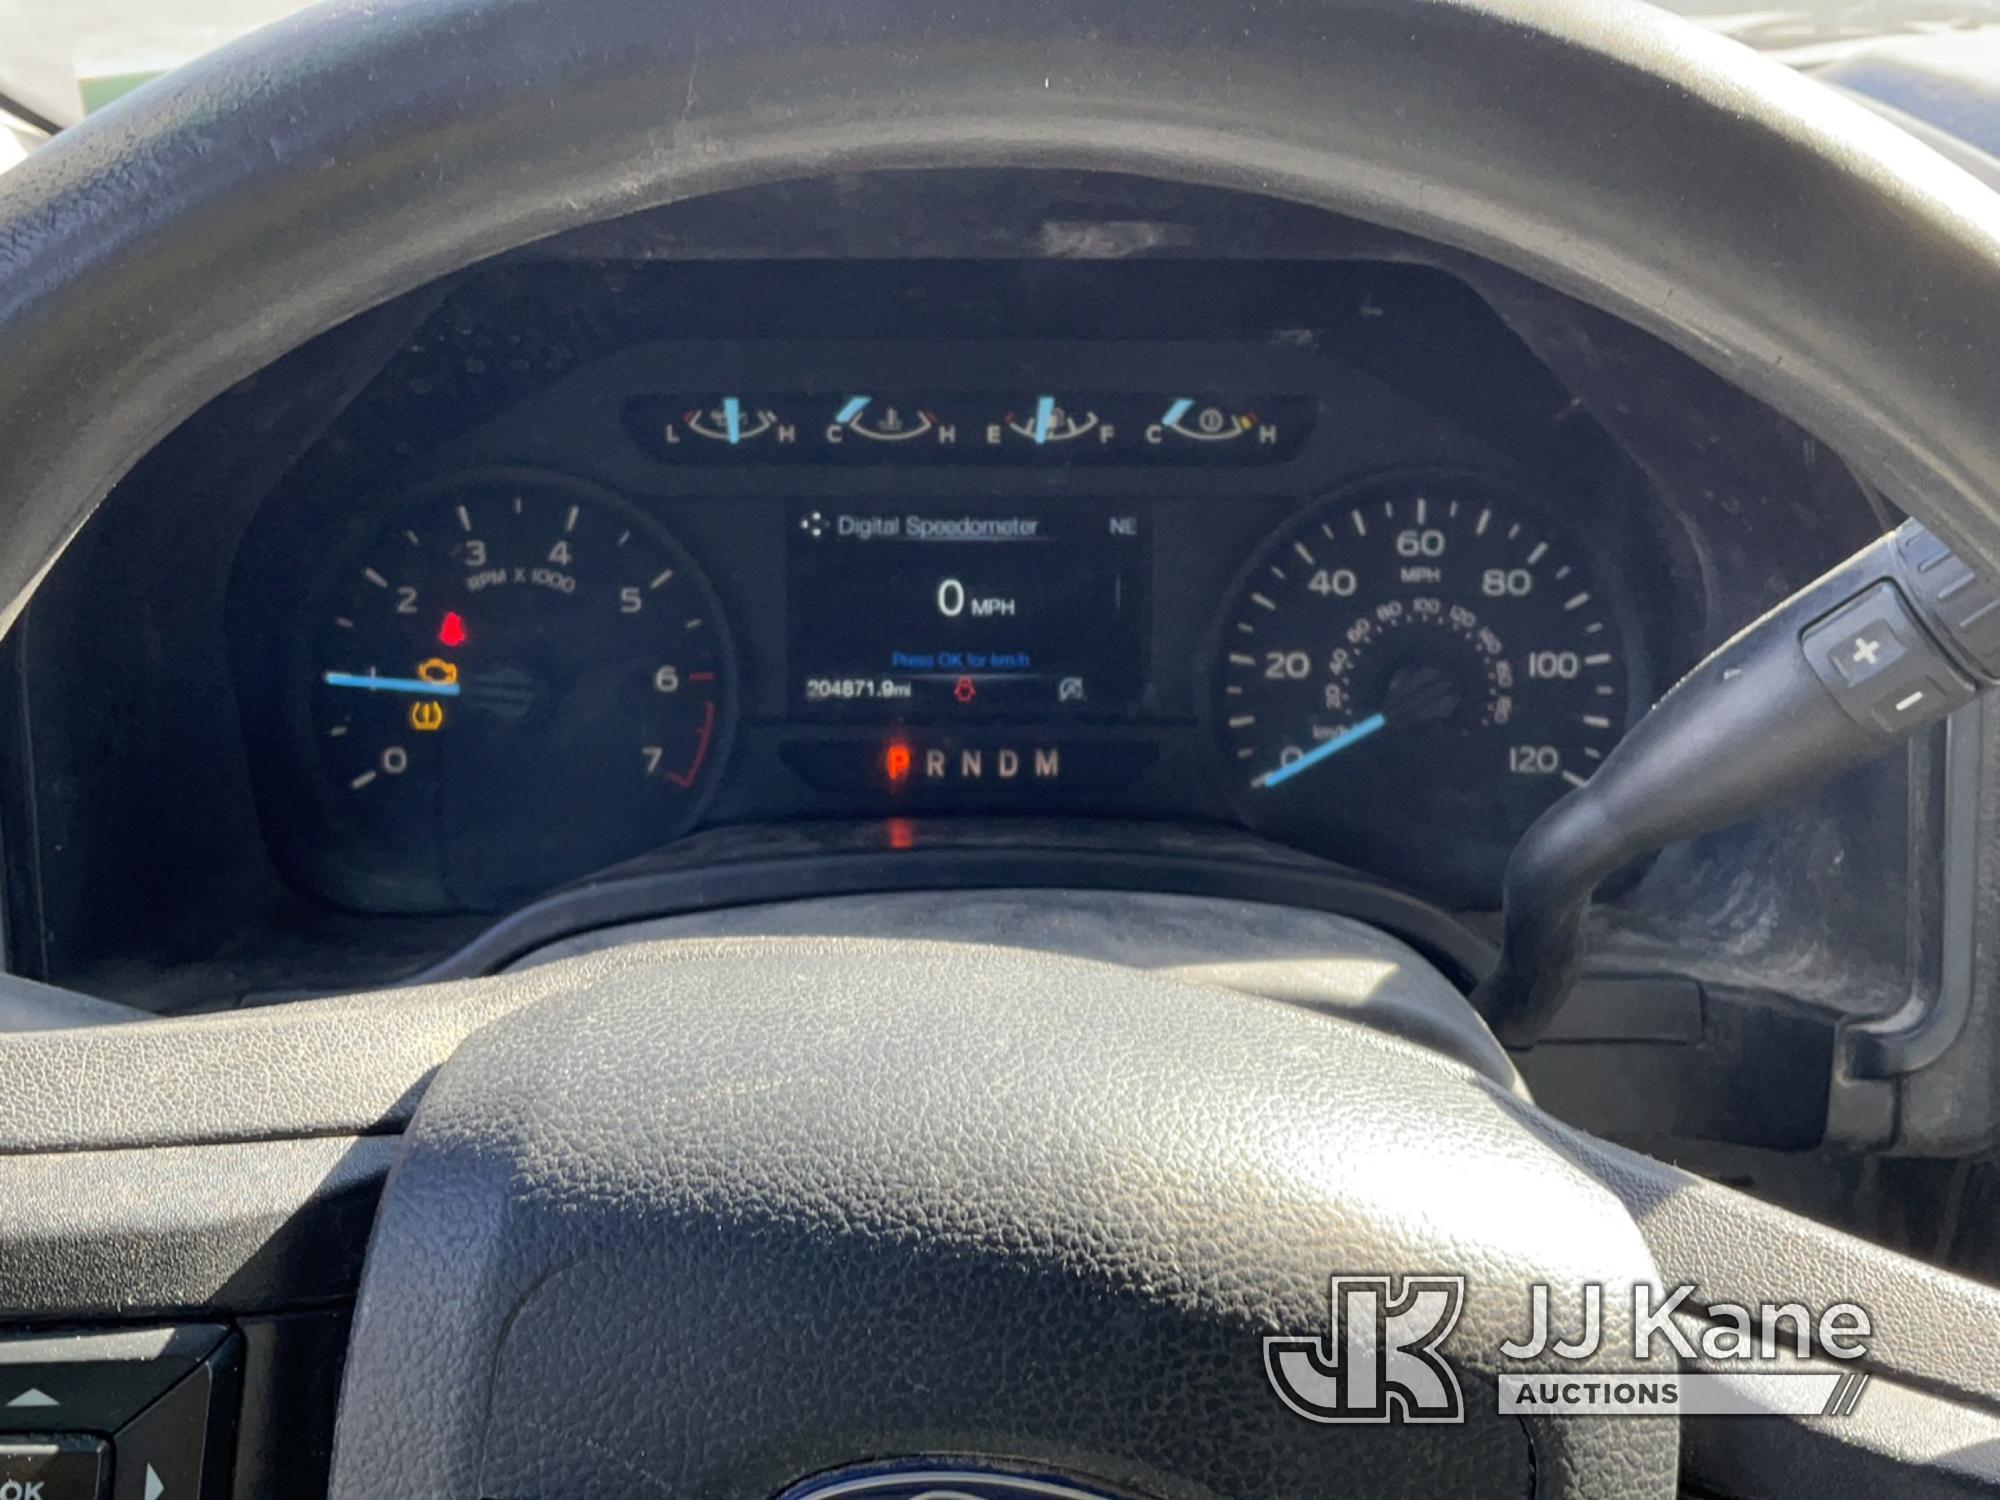 (Maple Lake, MN) 2018 Ford F150 4x4 Extended-Cab Pickup Truck Runs And Moves. Check Engine Light On.